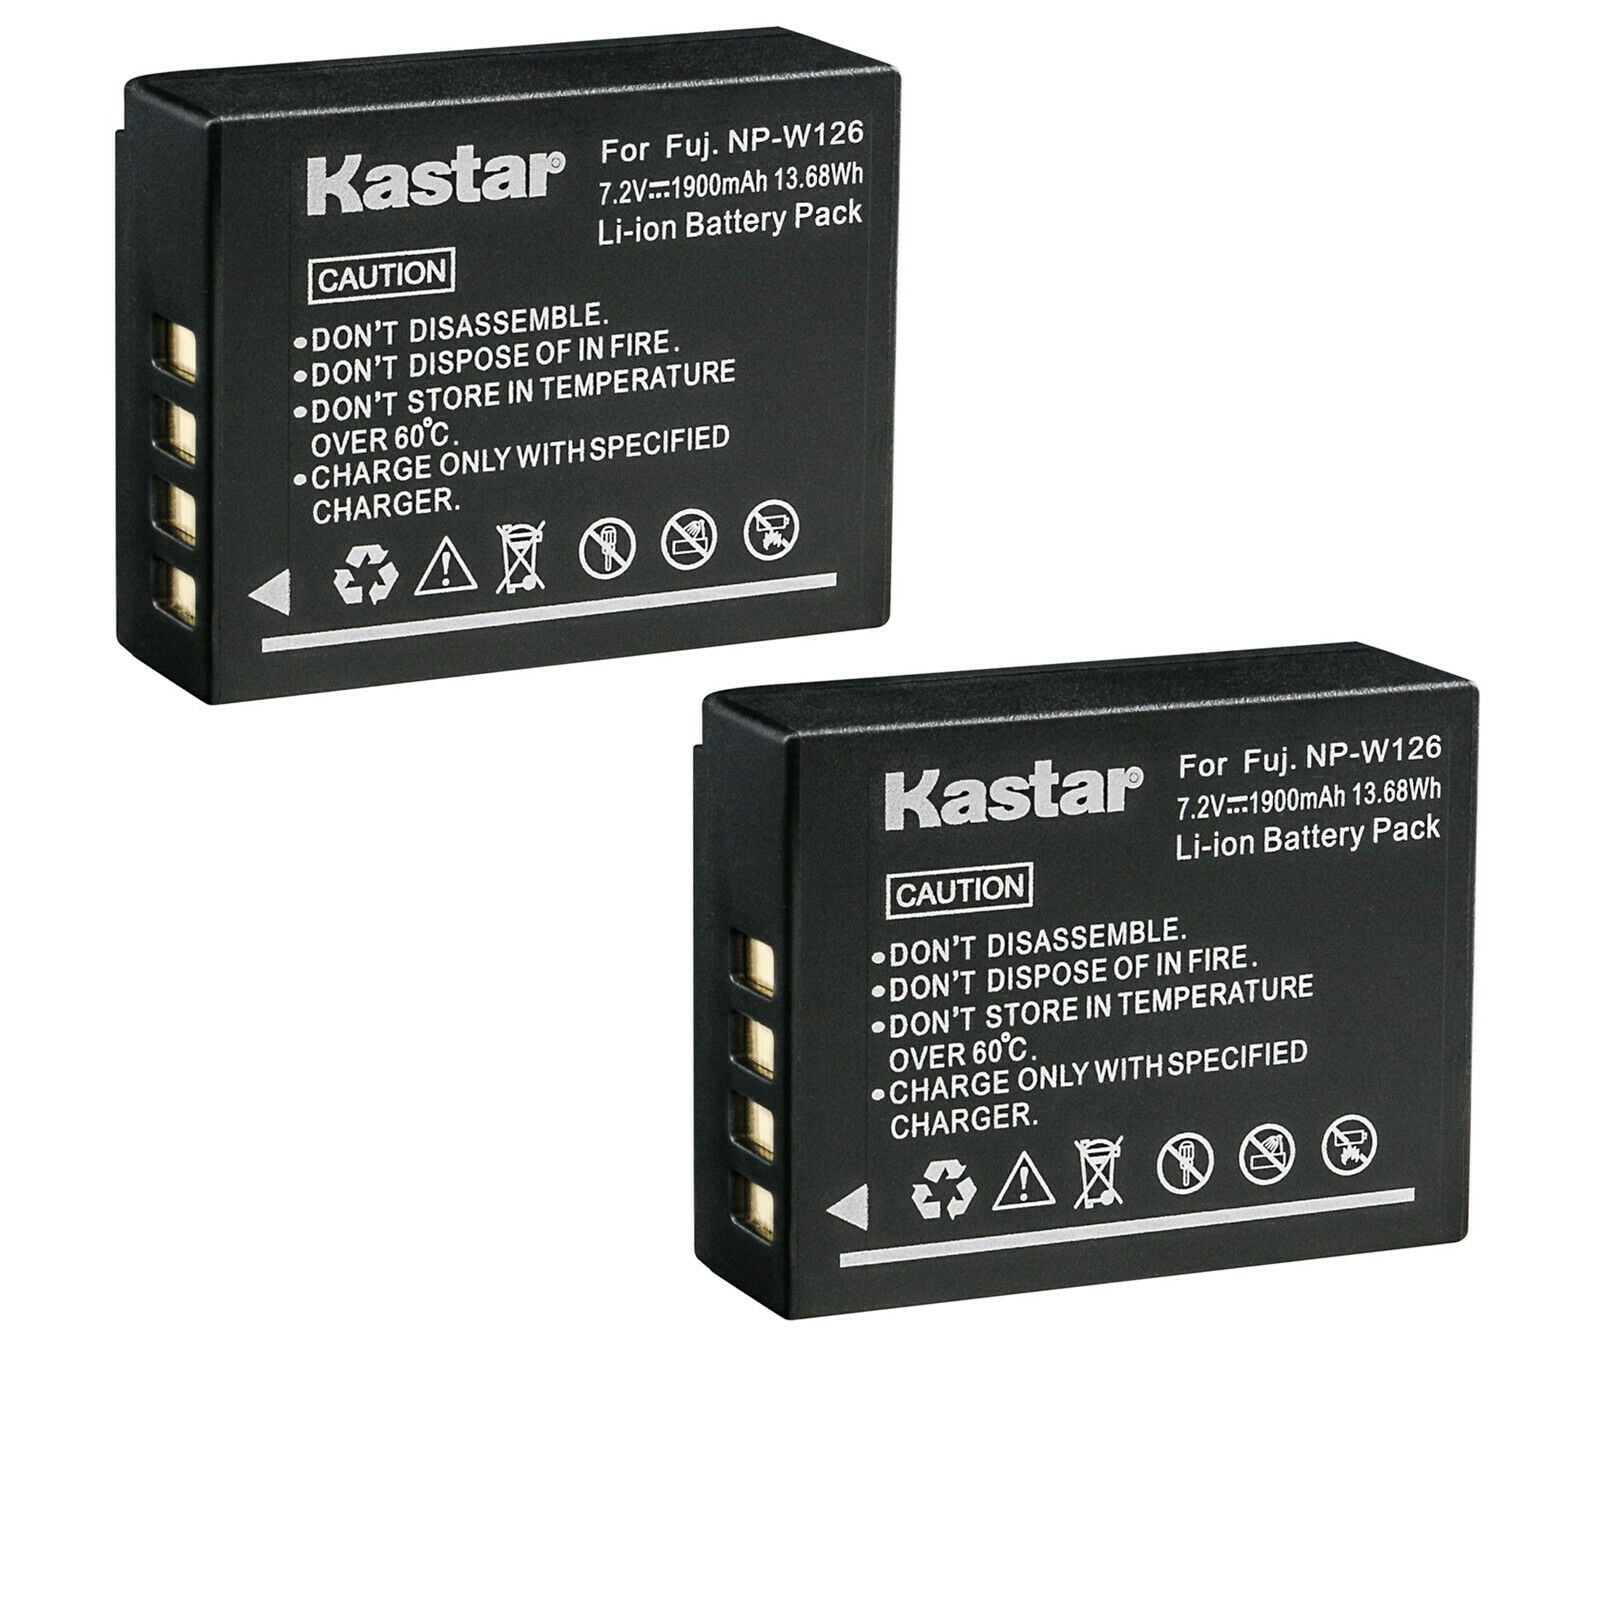 Kastar 2-Pack Battery Replacement for Fujifilm NP-W126 NP-W126s BC- W126 Fujifilm X100F HS30EXR HS33EXR HS35EXR HS50EXR X-PRO2 X-A1 X-A2 X-A3 X-A5 X-A7 X-A10 Camera - Walmart.com